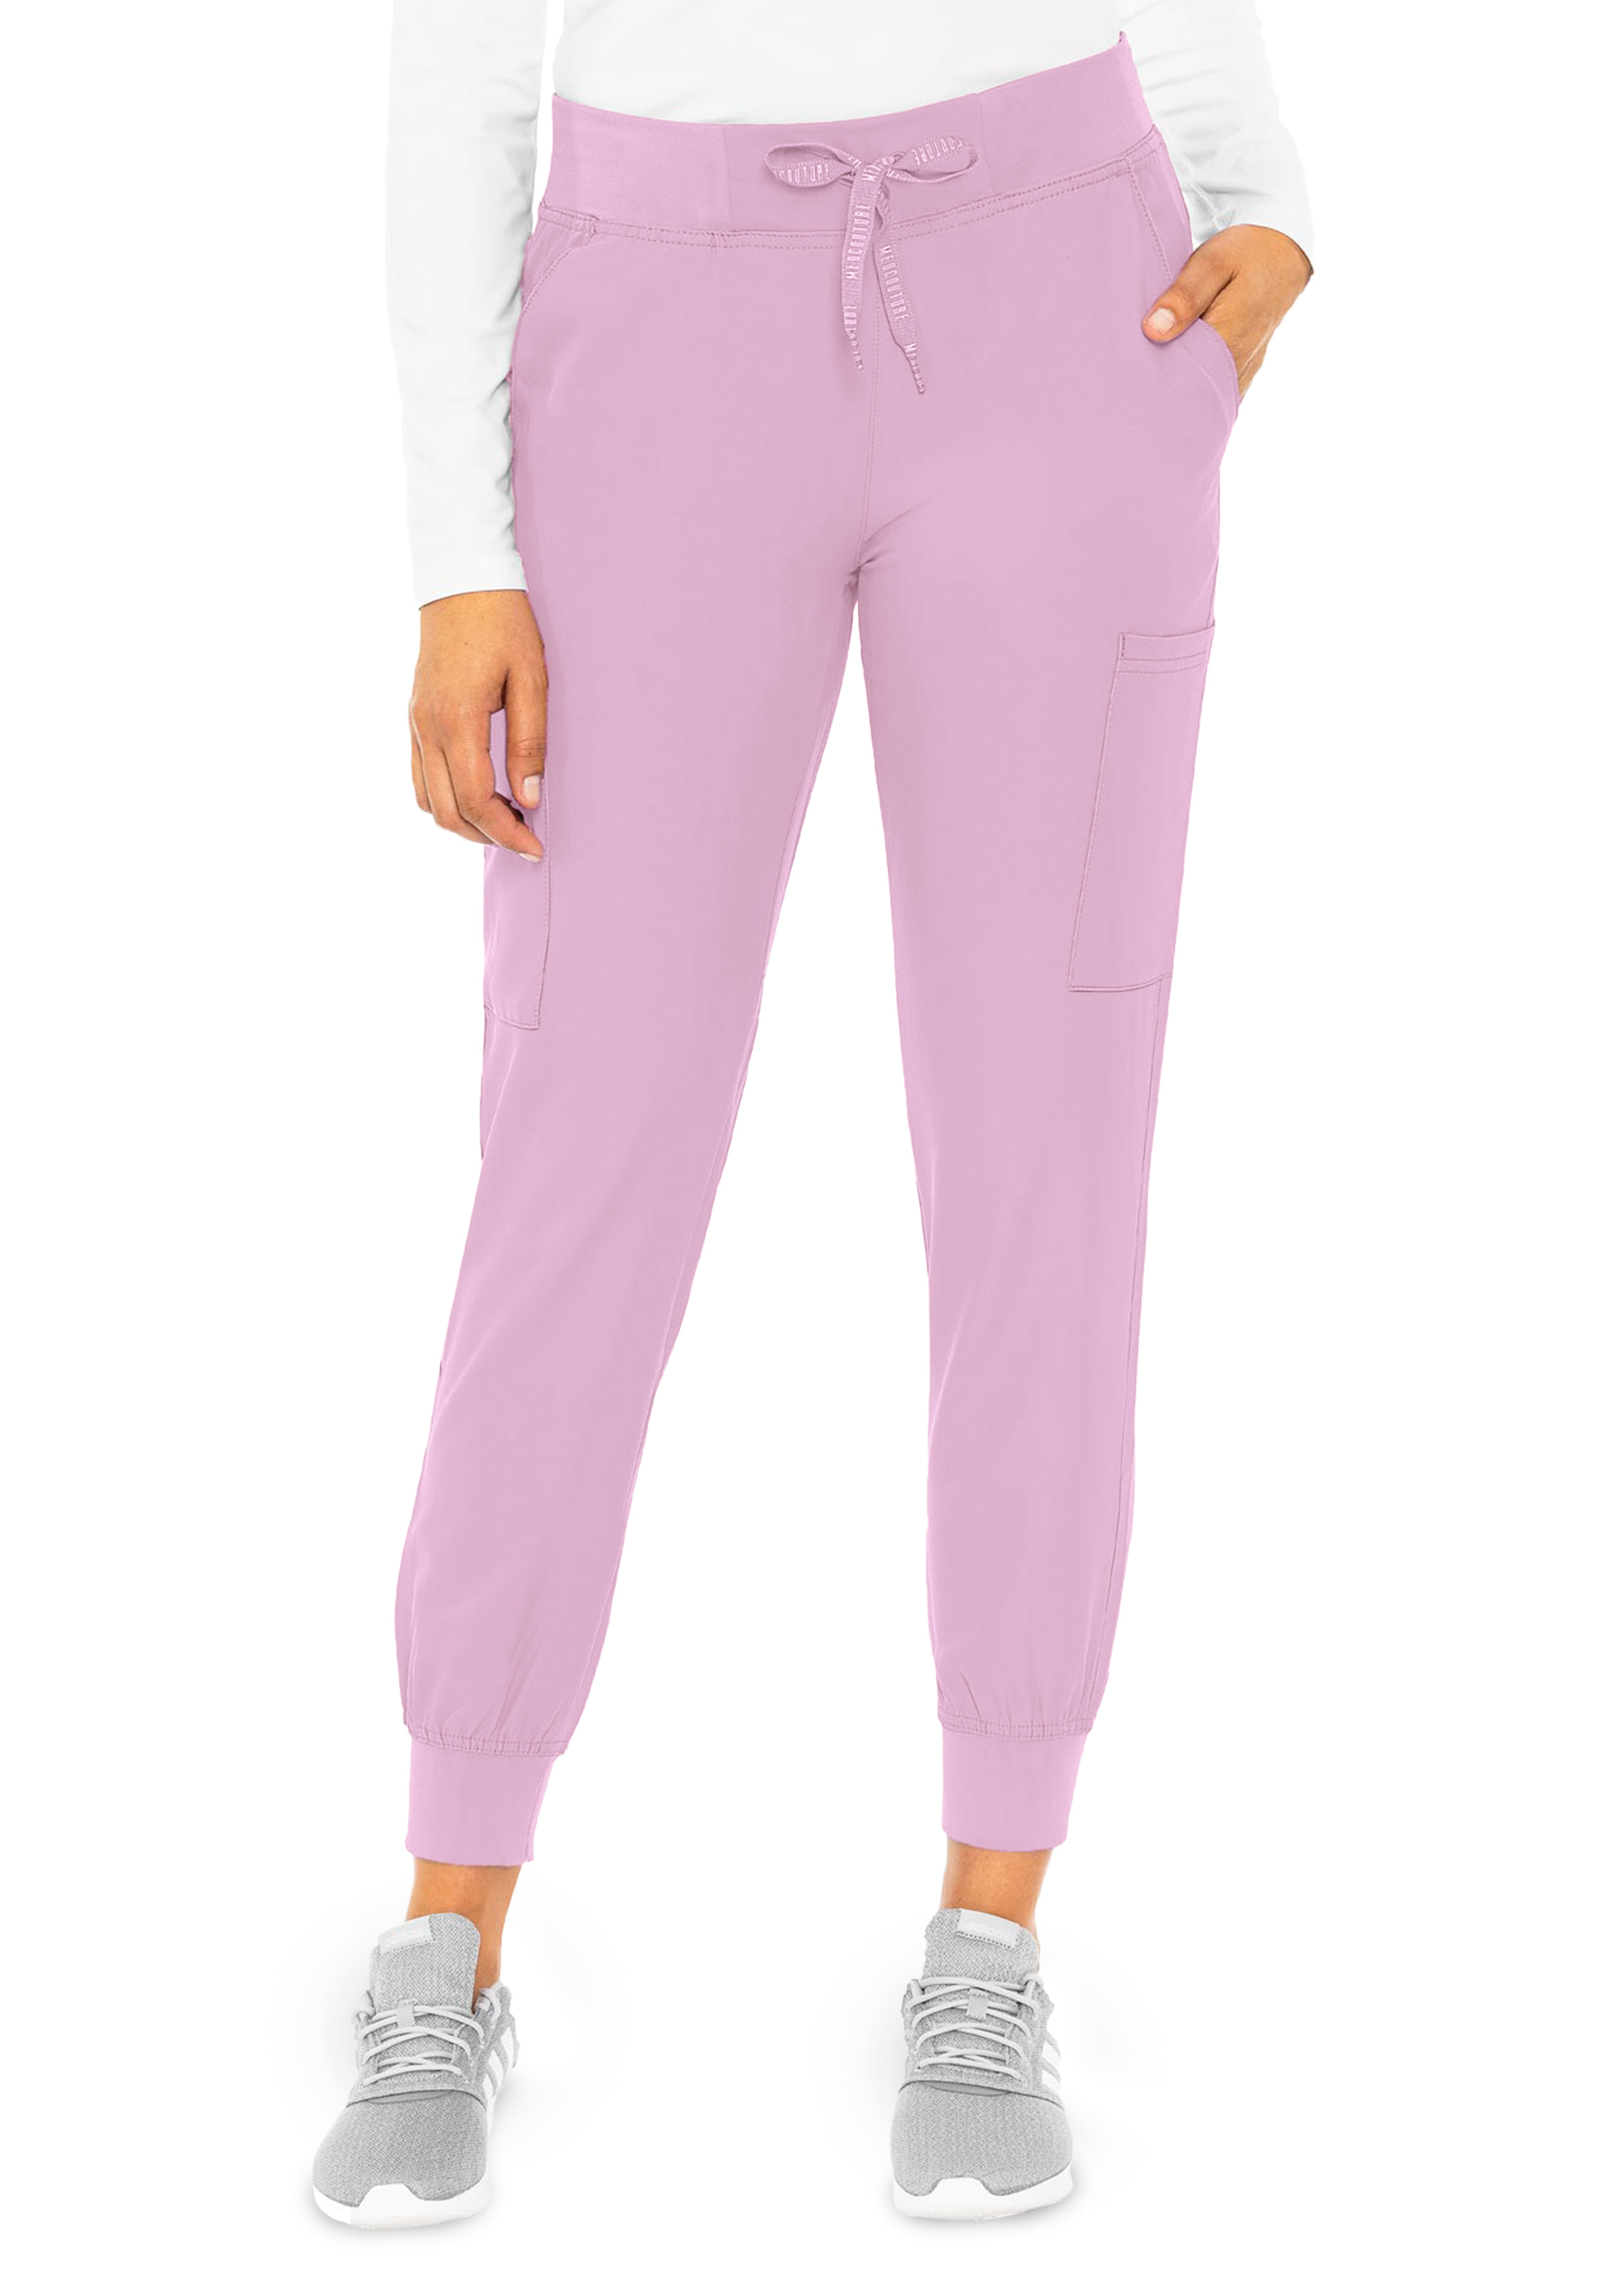 Med Couture Insight Jogger Scrub Pants | Scrubs & Beyond